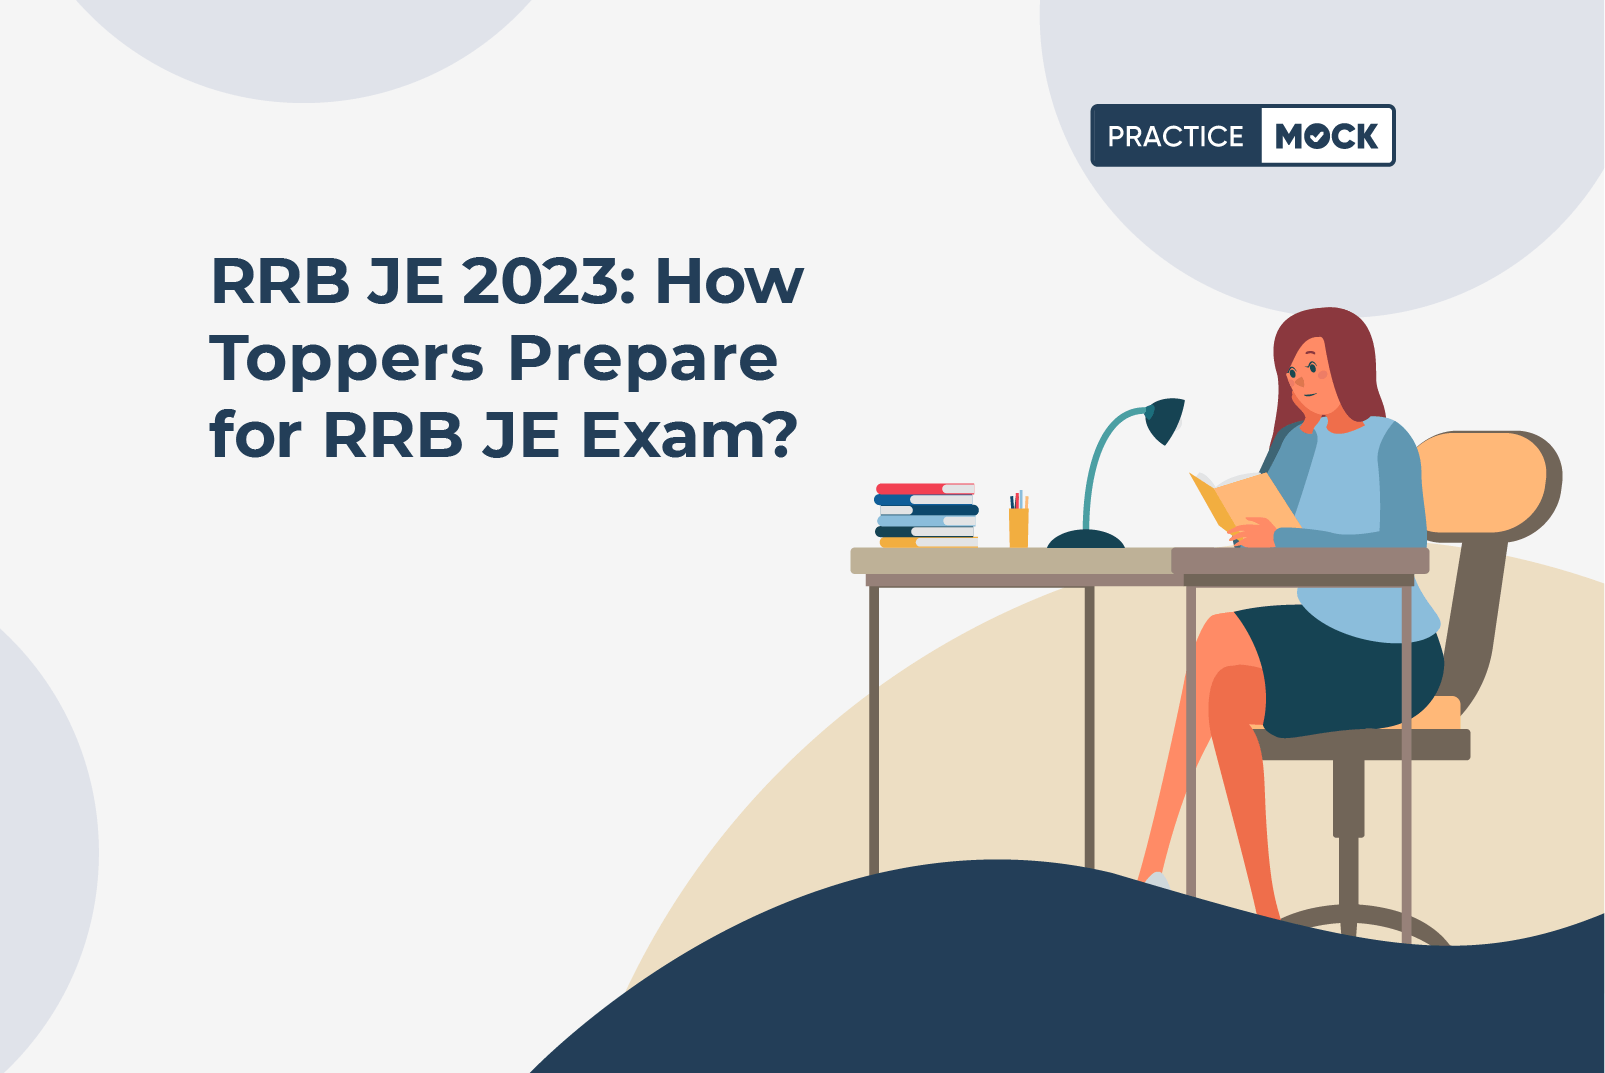 RRB JE 2023: How Toppers Prepare for RRB JE Exam?